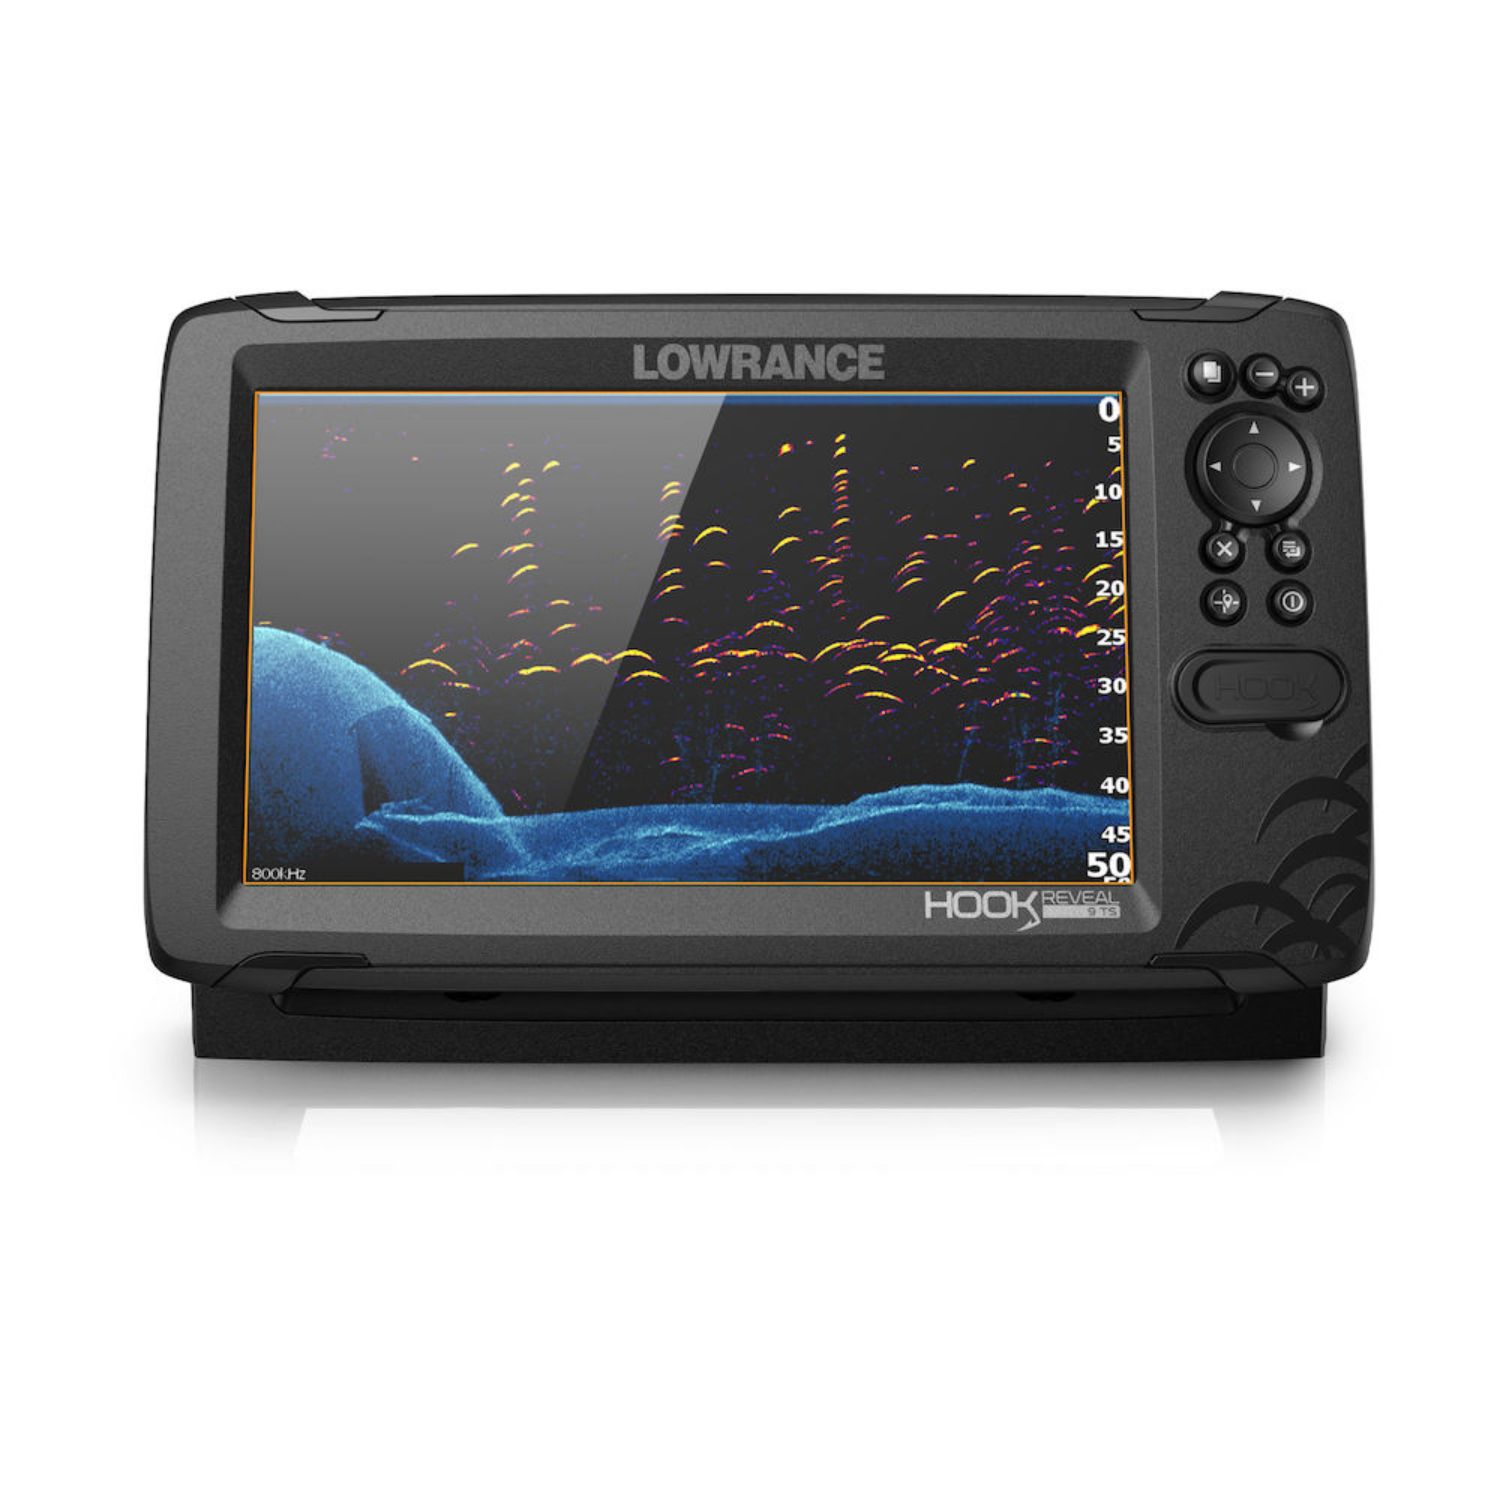 Lowrance Hook Reveal 9" Triple-Shot Portable Fish-Finder with CHIRP - image 1 of 7